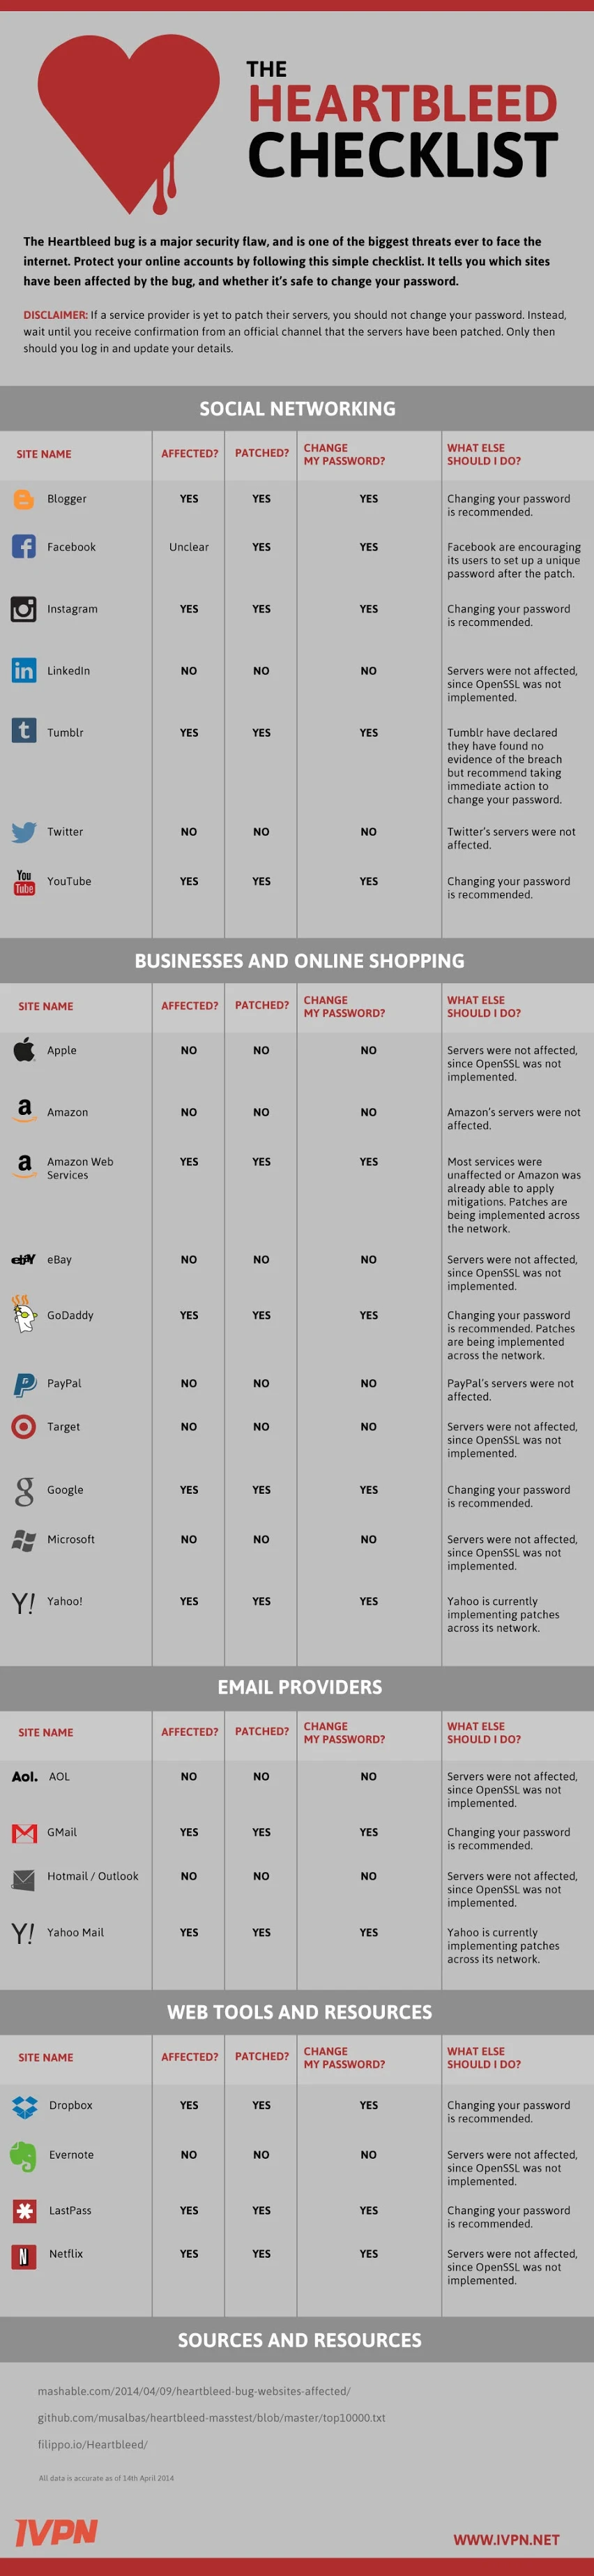 The Heartbleed Checklist: Should You Change Your Social Media Passwords - infographic